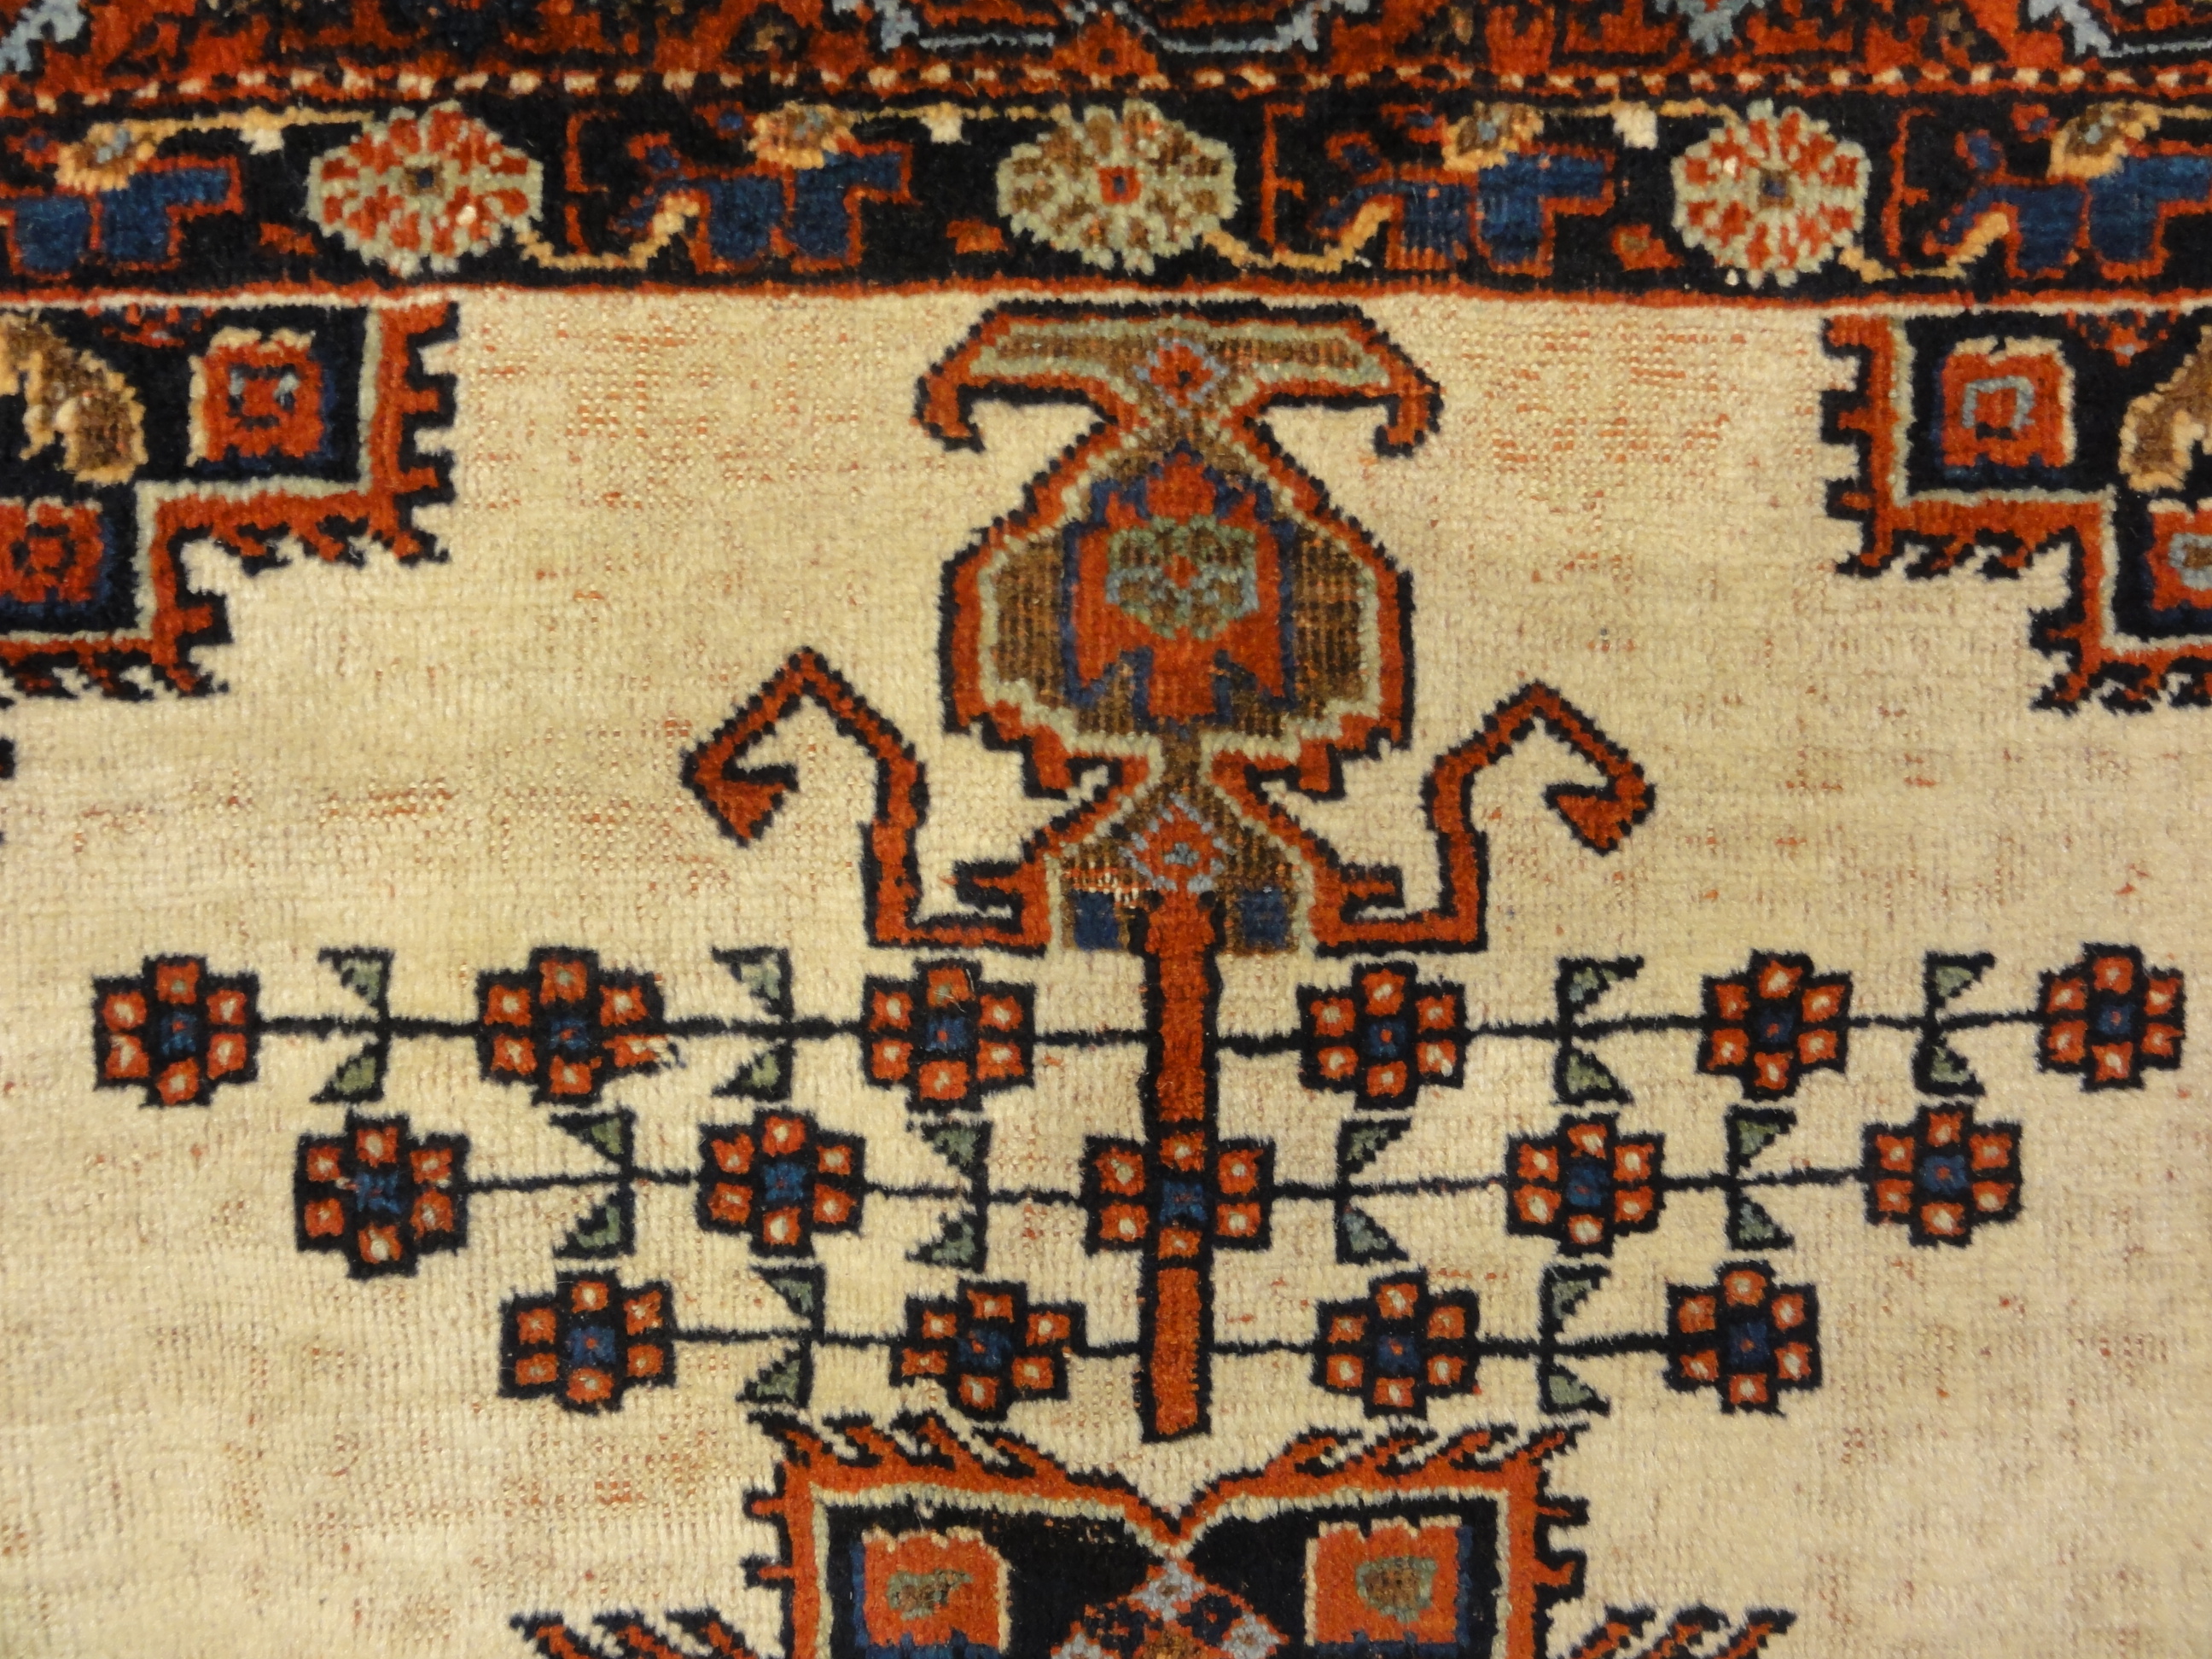 A Rare Antique Persian Afshar Rug. A piece of genuine handwoven carpet art. Sold by Santa Barbara Design Center, Rugs and More.